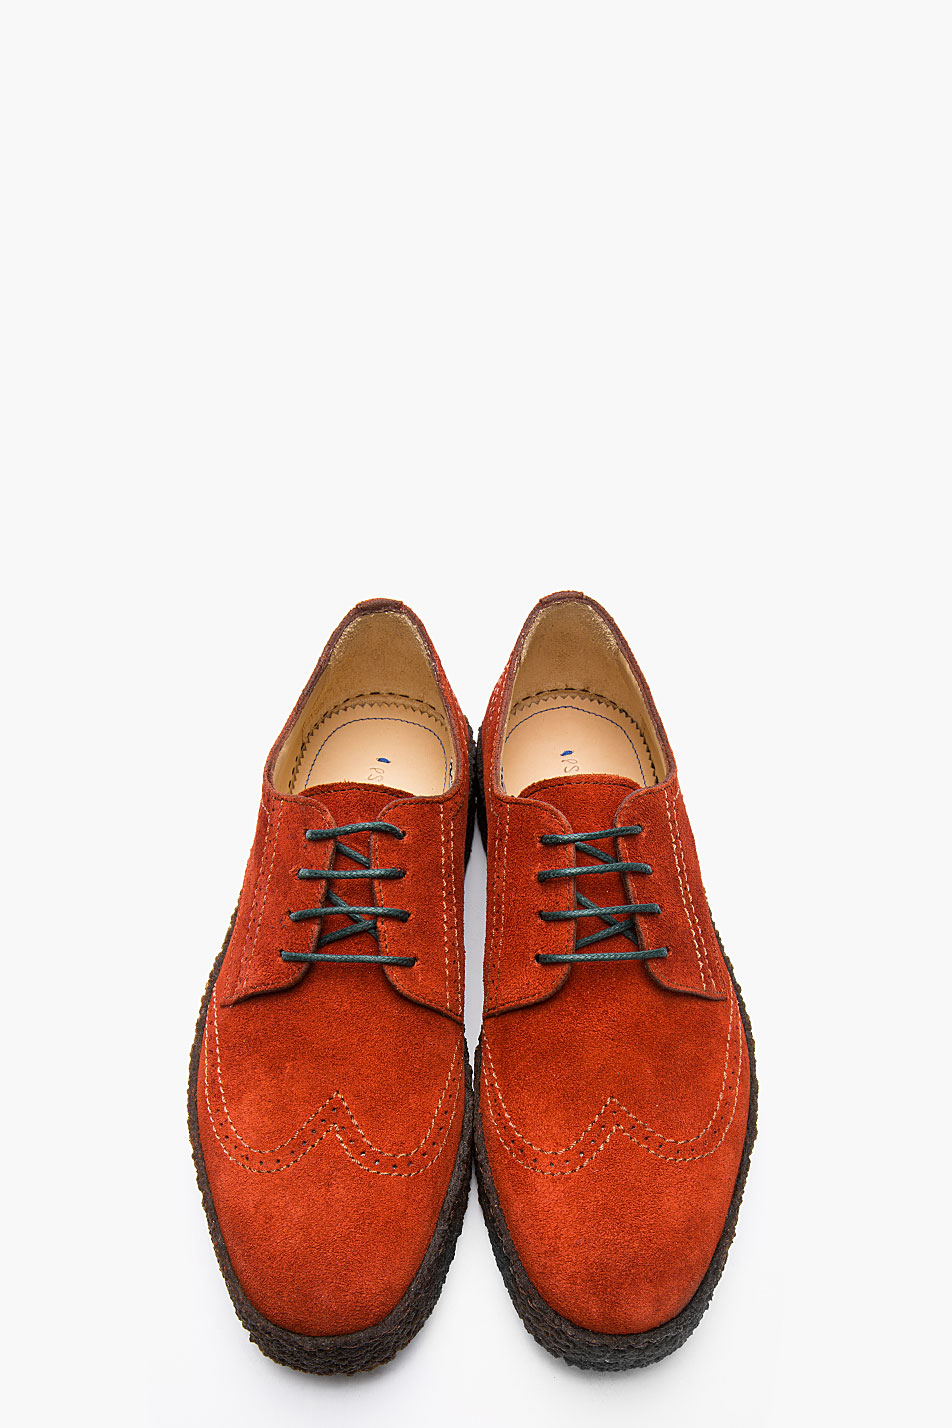 Lyst - Ps by paul smith Rust Suede Dip Dyed Ramsey Brogues in Red for Men